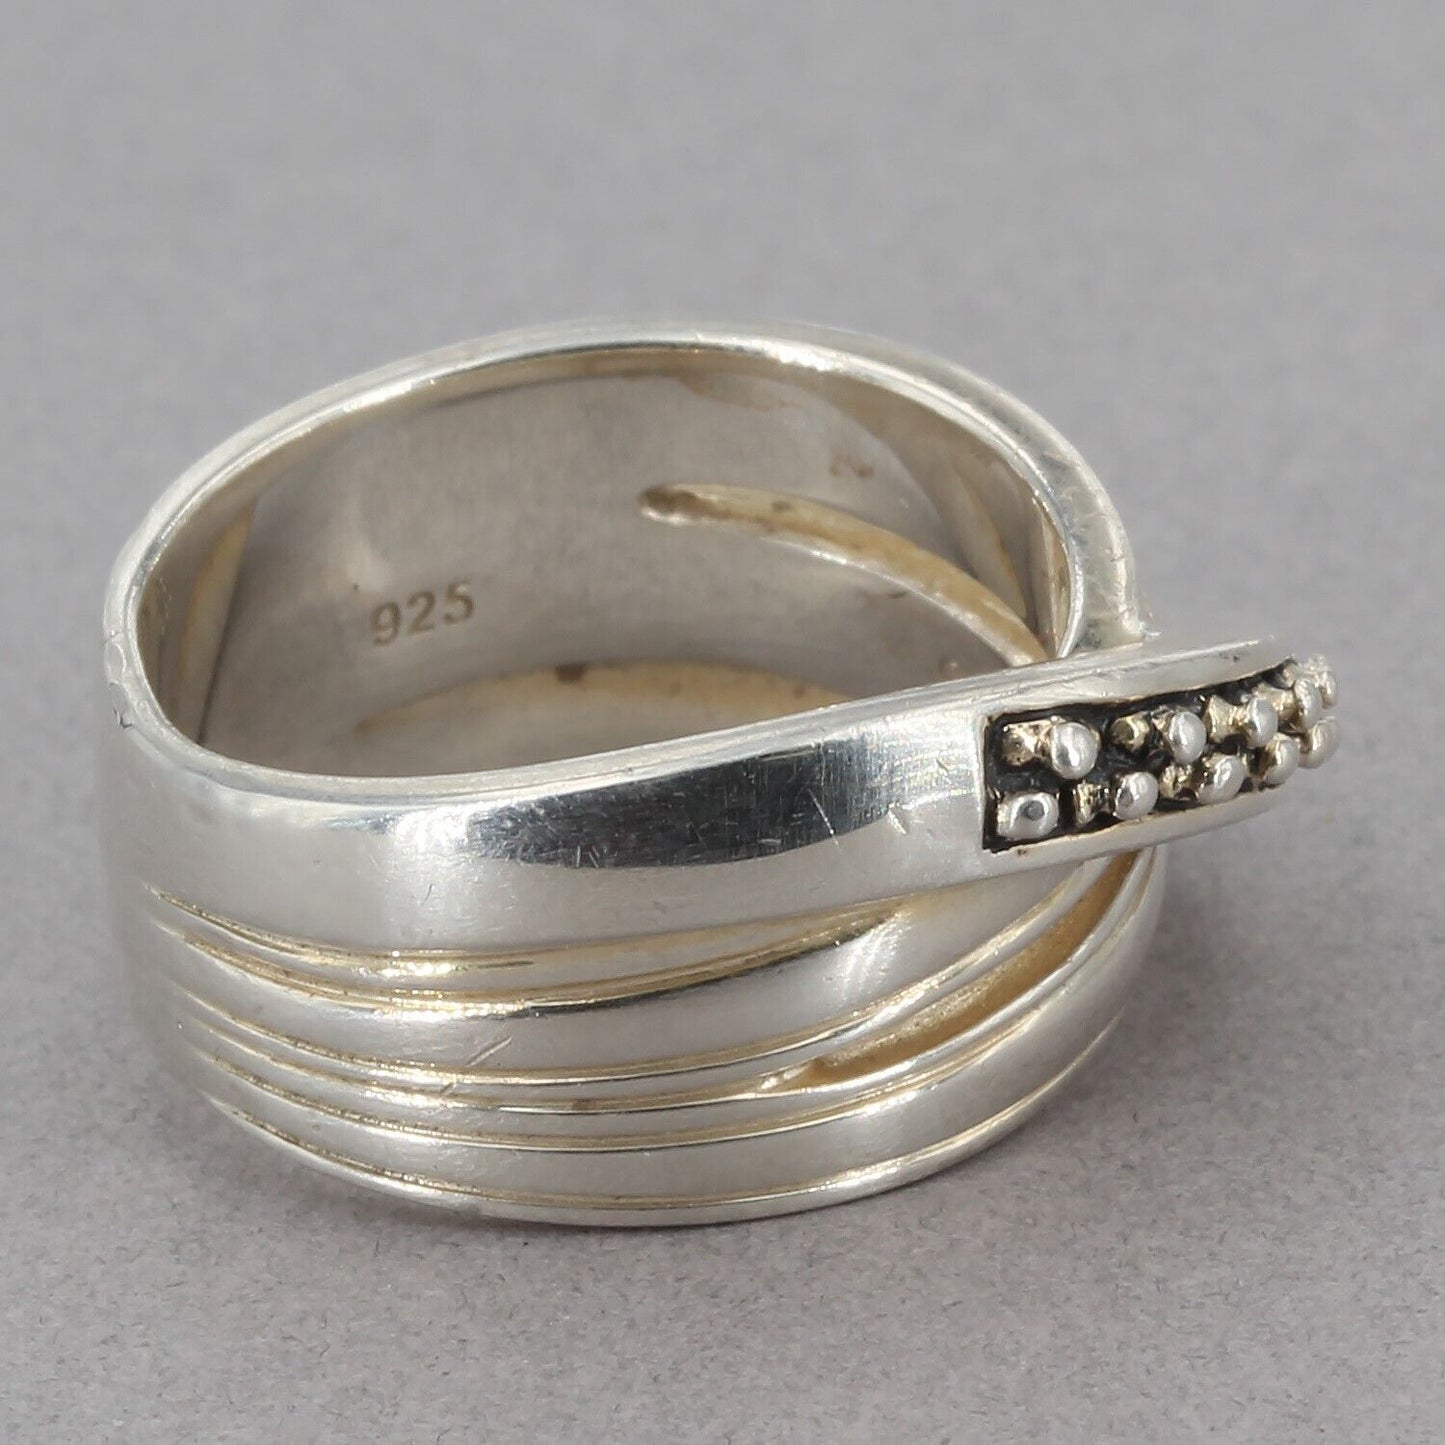 Michael Dawkins Oxidized Sterling Granulation Crossover Bypass Band Ring Size 6